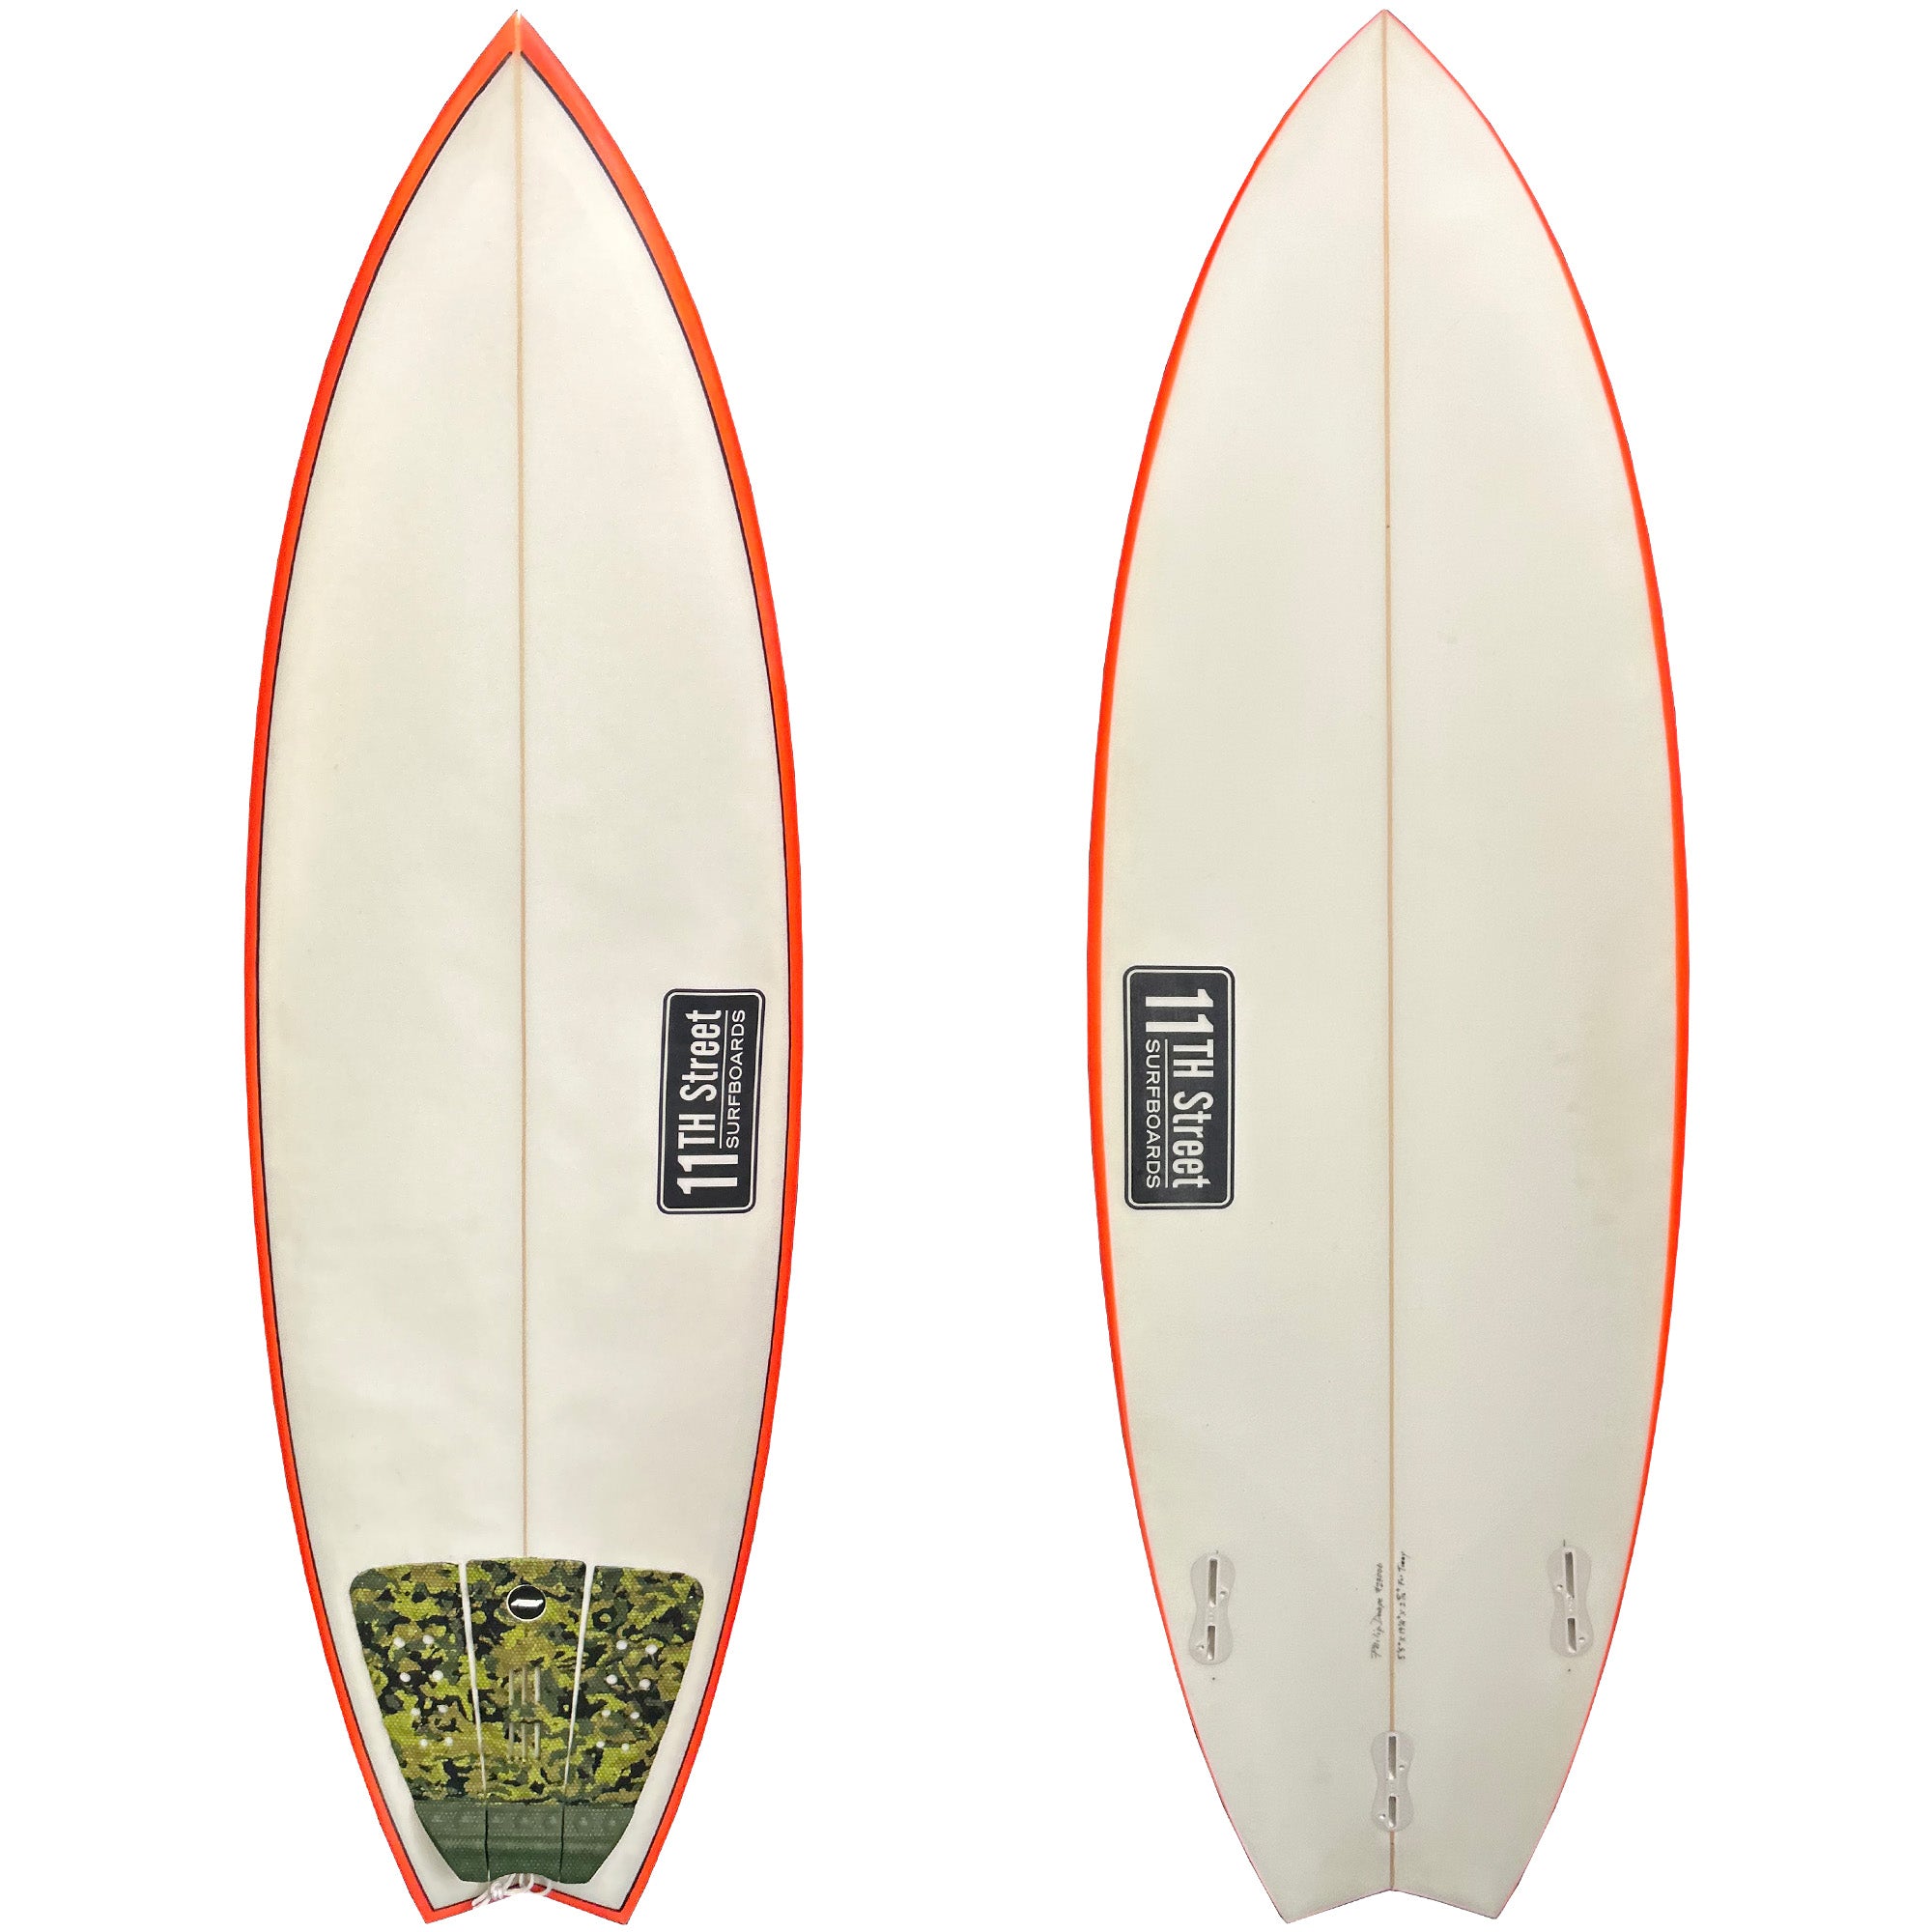 11th Street Surfboards Puffin 5'5 Consignment Surfboard